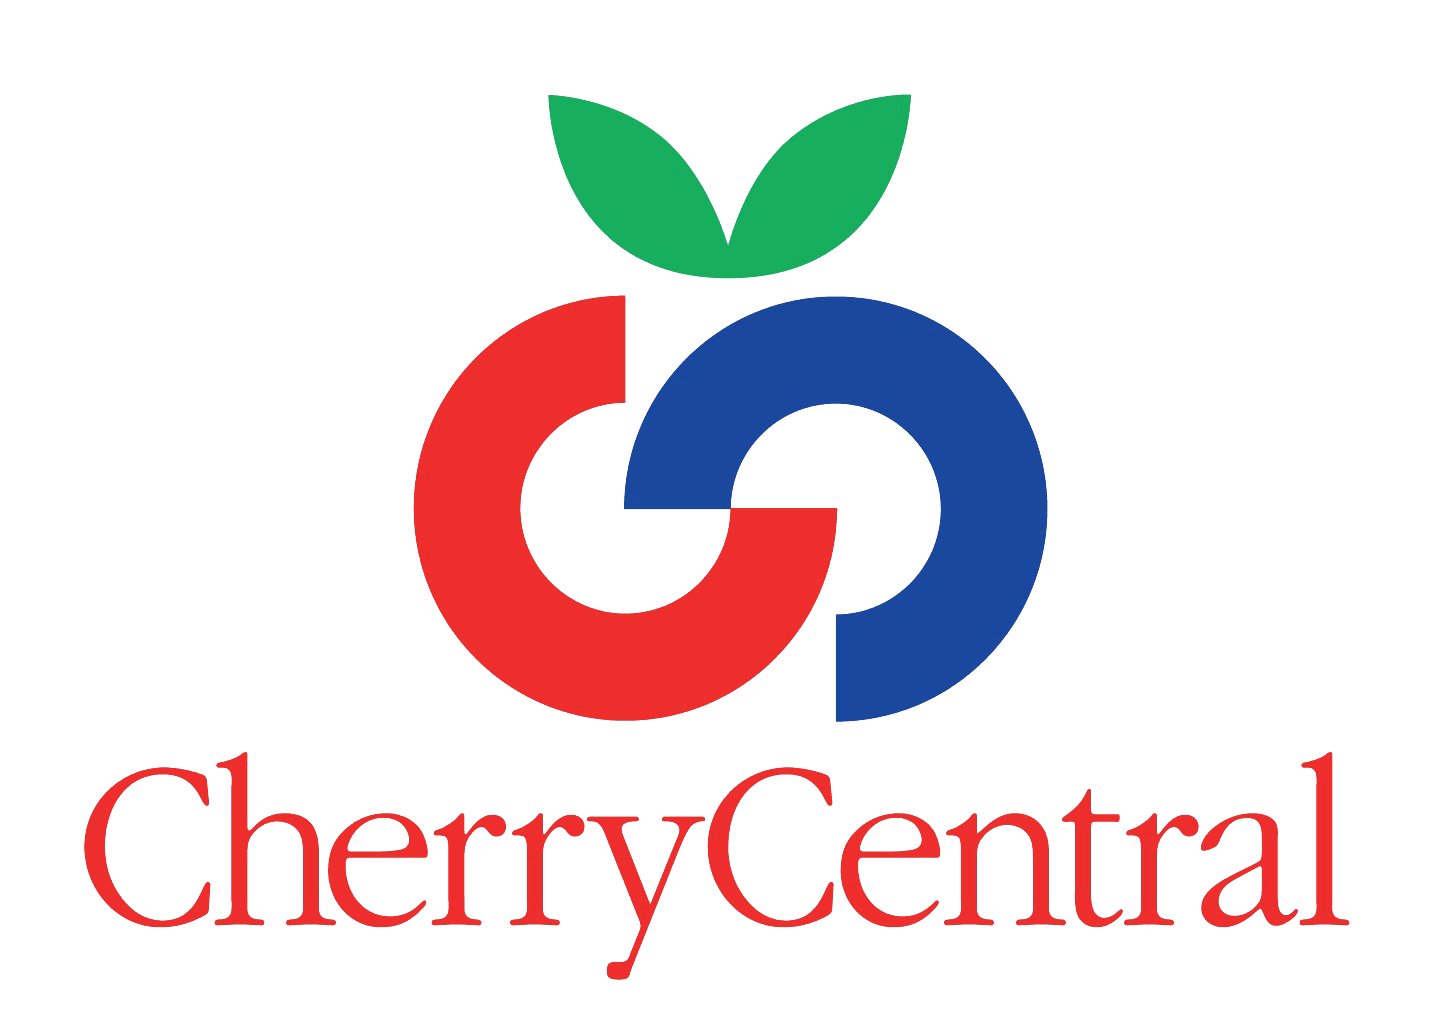 The red, blue, and green Cherry Central logo.